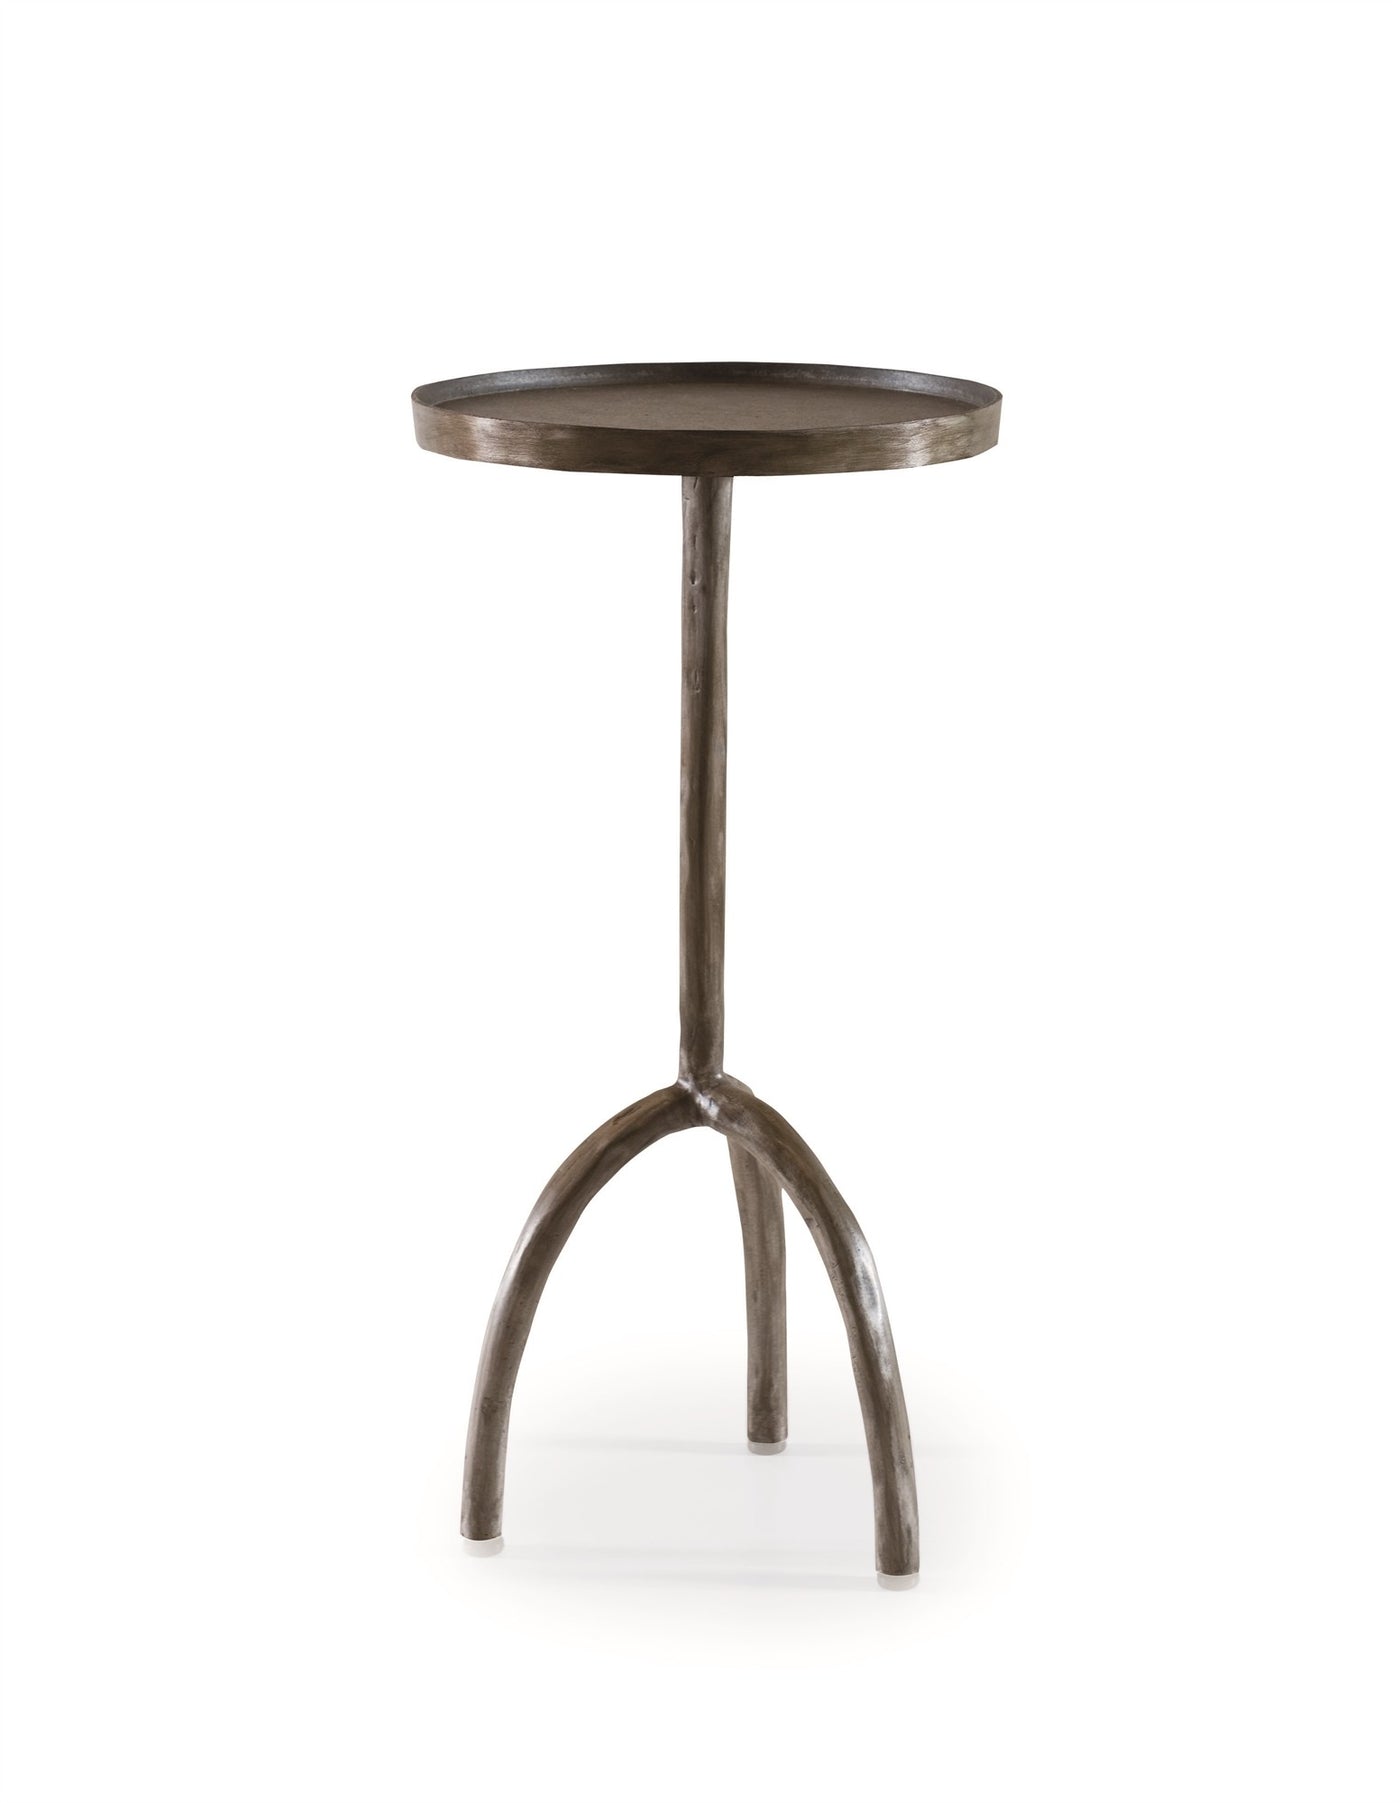 SIDE TABLE STEEL ROUND